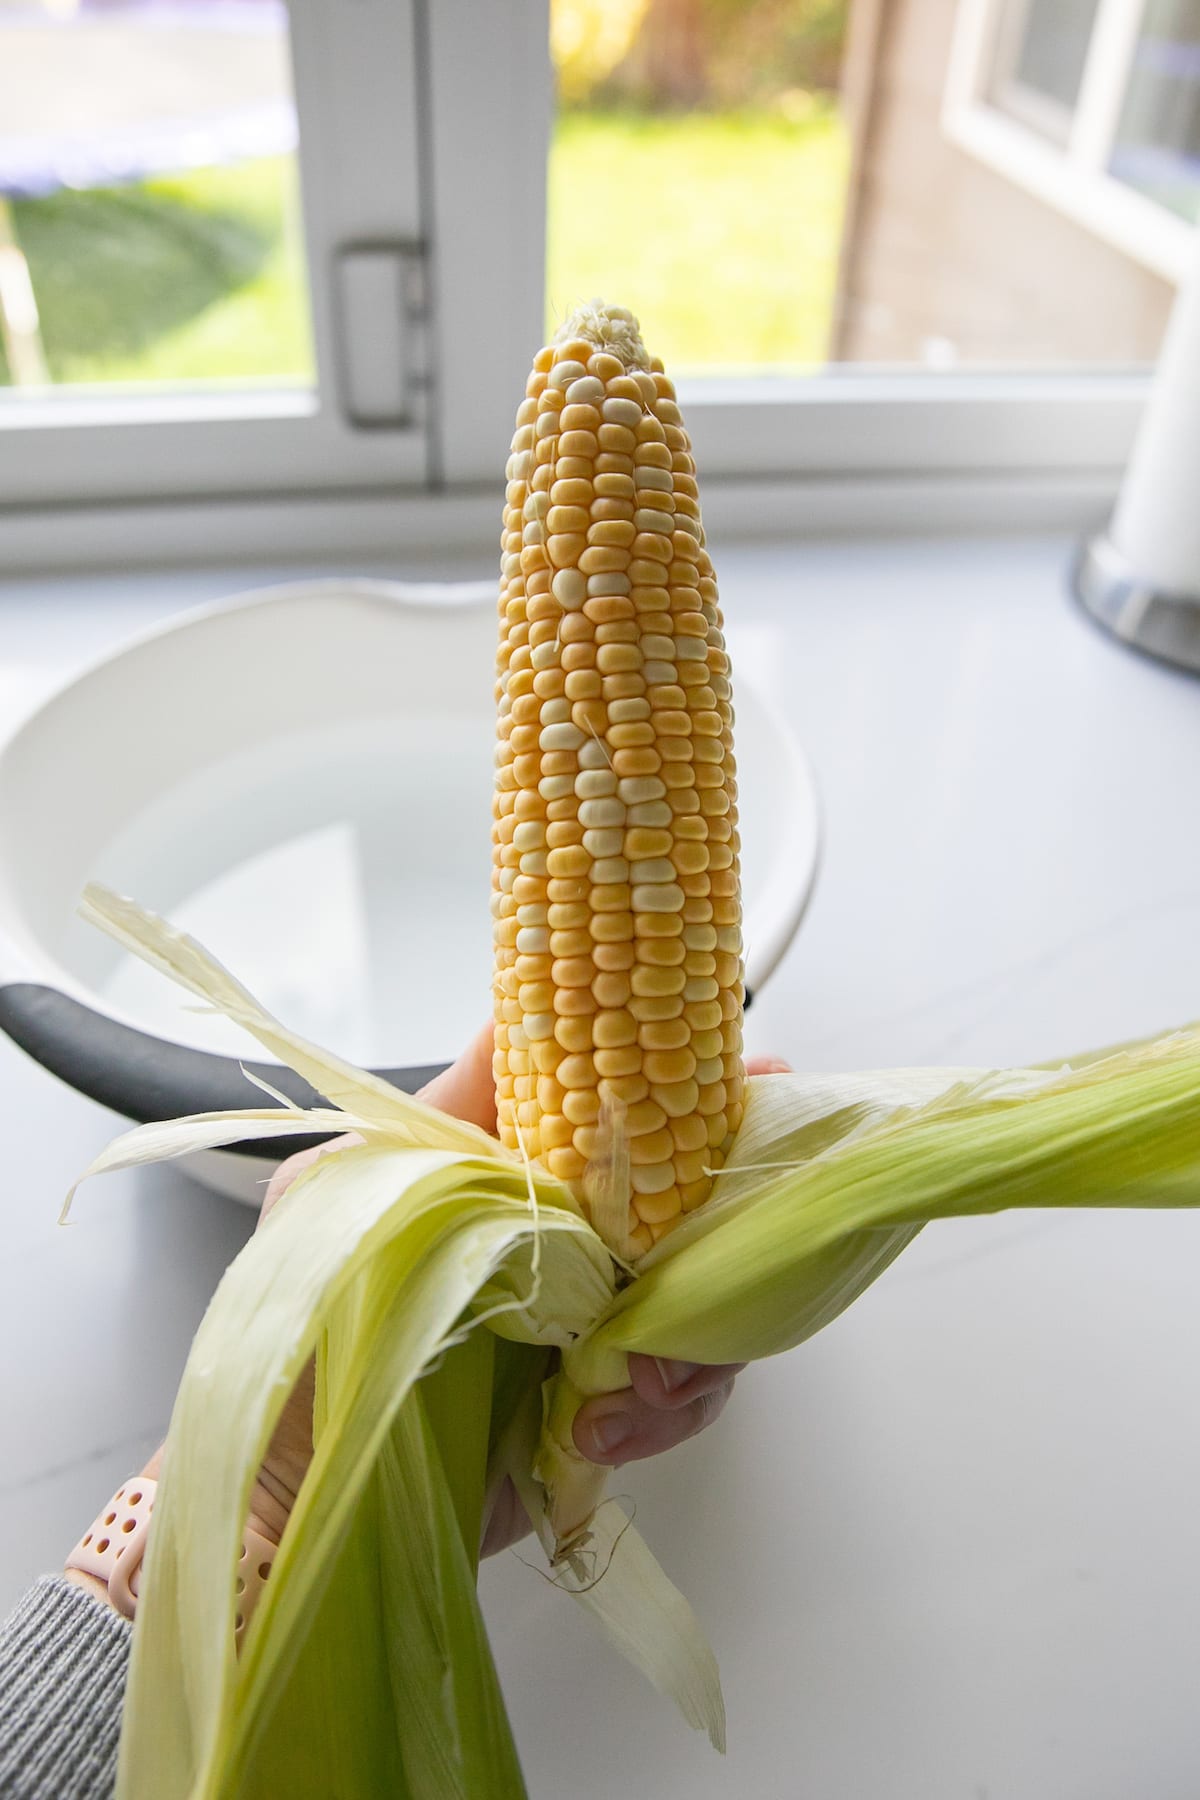 hand holding corn on the cob with silk removed